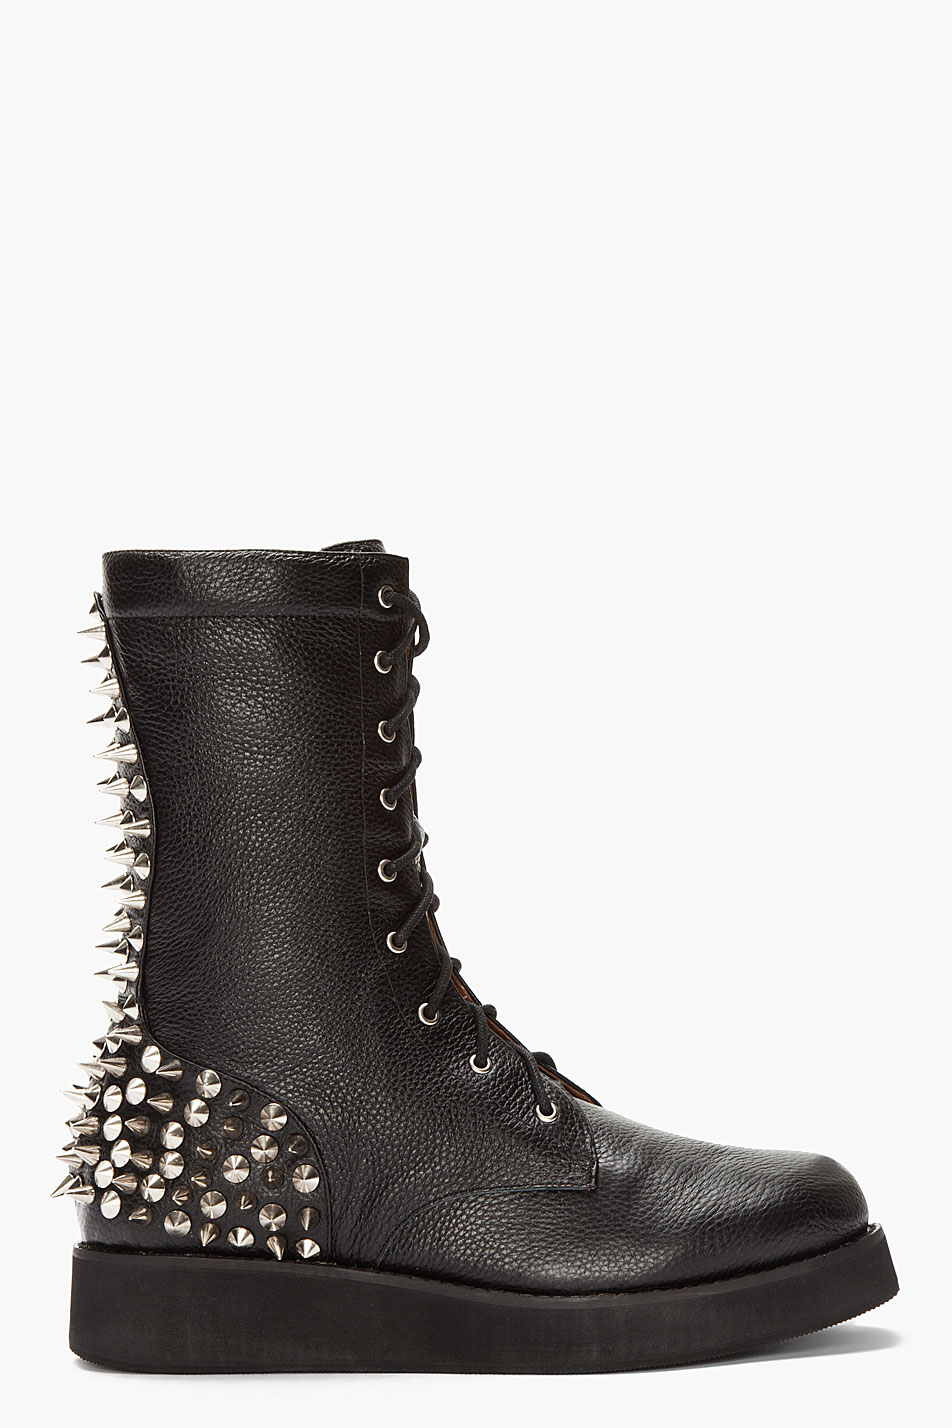 Jeffrey Campbell Tall Black Leather Spiked Reznorspk Boots in Black for ...